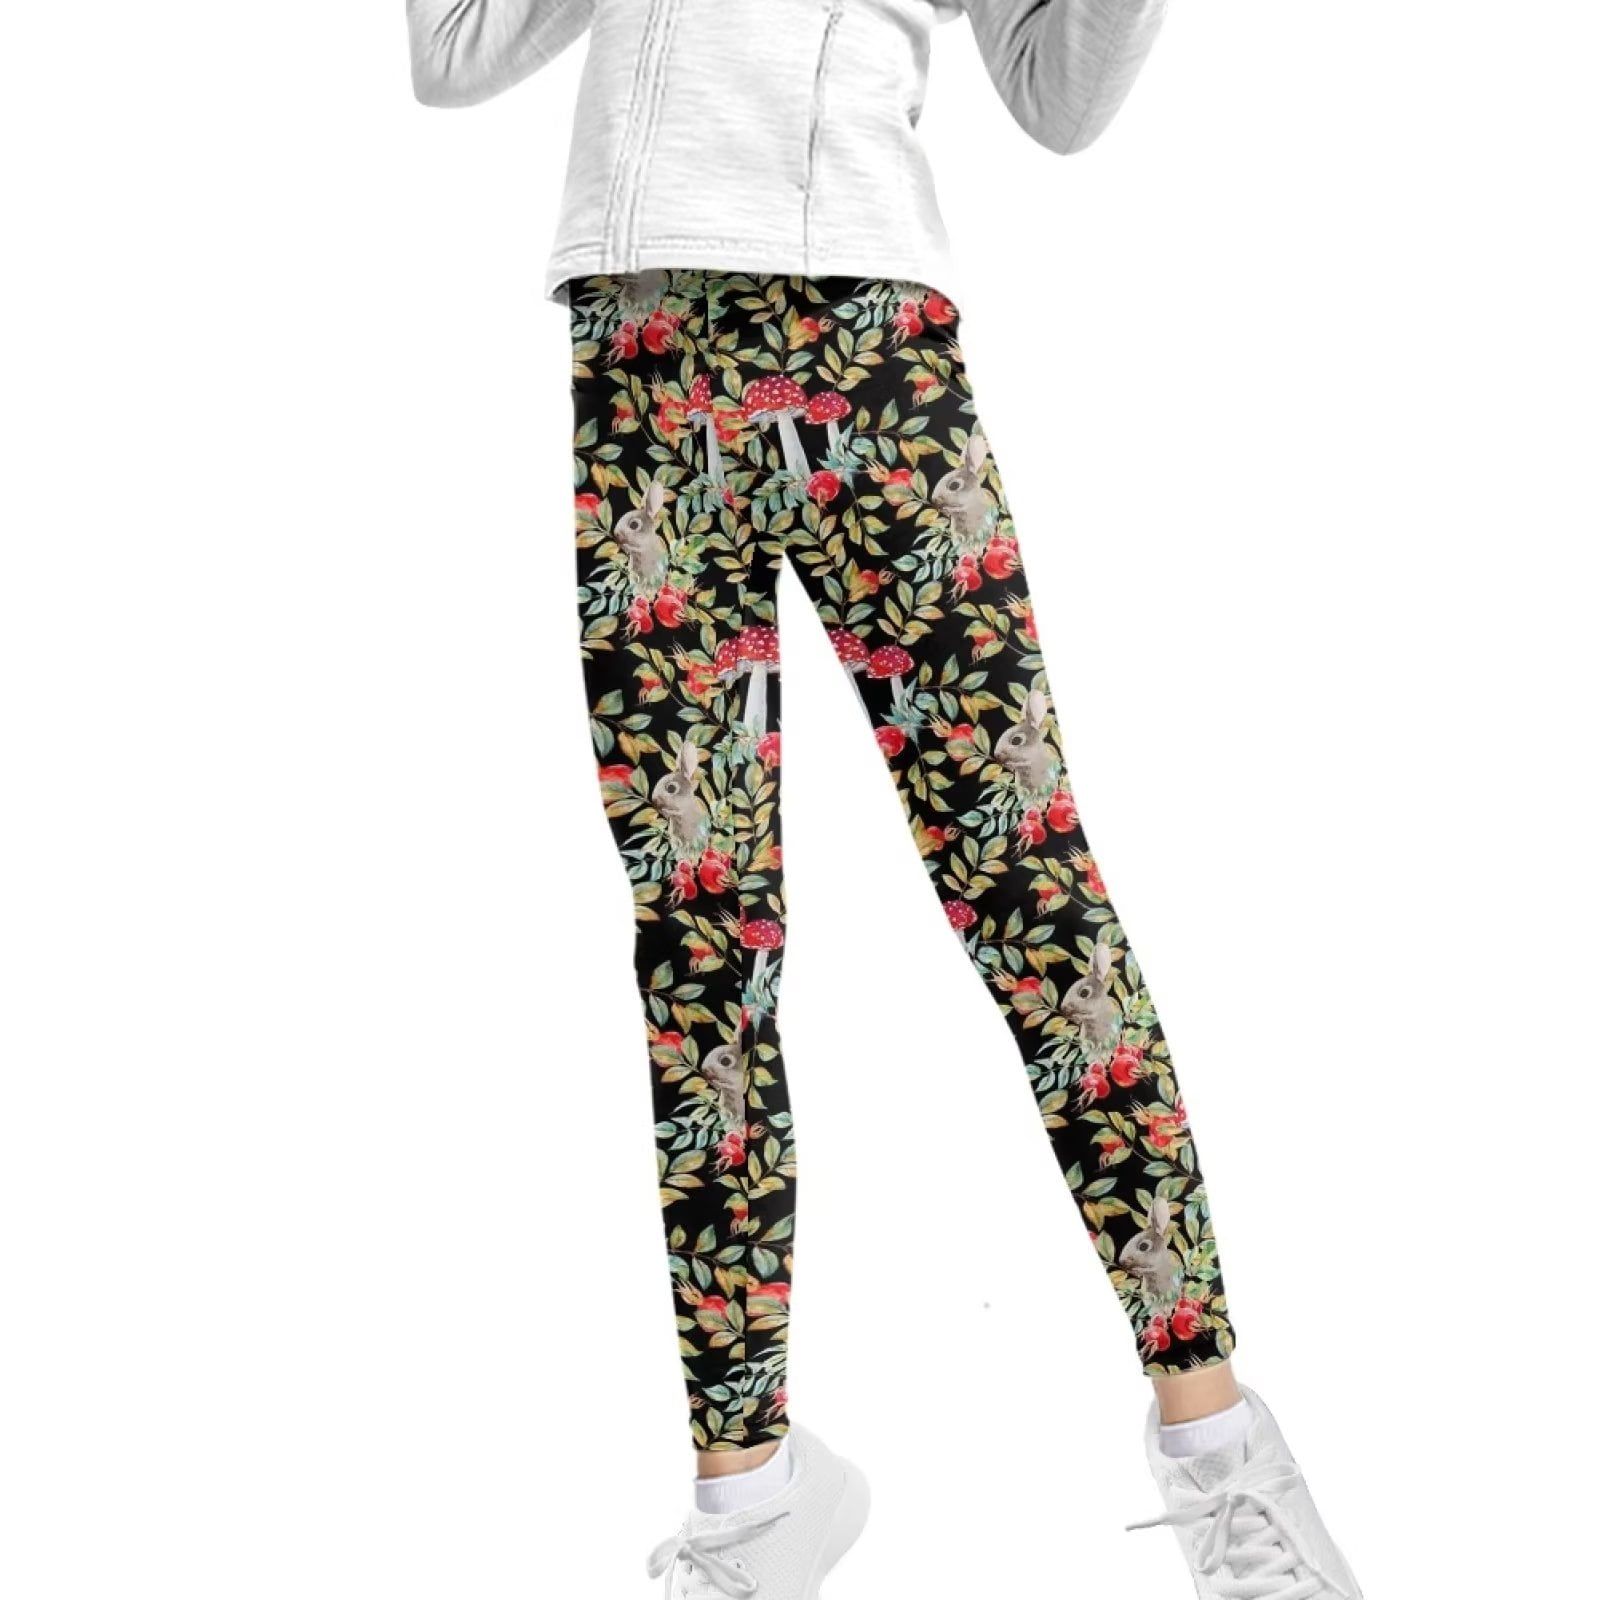 FKELYI Floral Butterfly Kids Leggings Size 8-9 Years Stretchy Playing Yoga  Pants for Girls High Waisted Comfy Travel Tights Aesthetic 